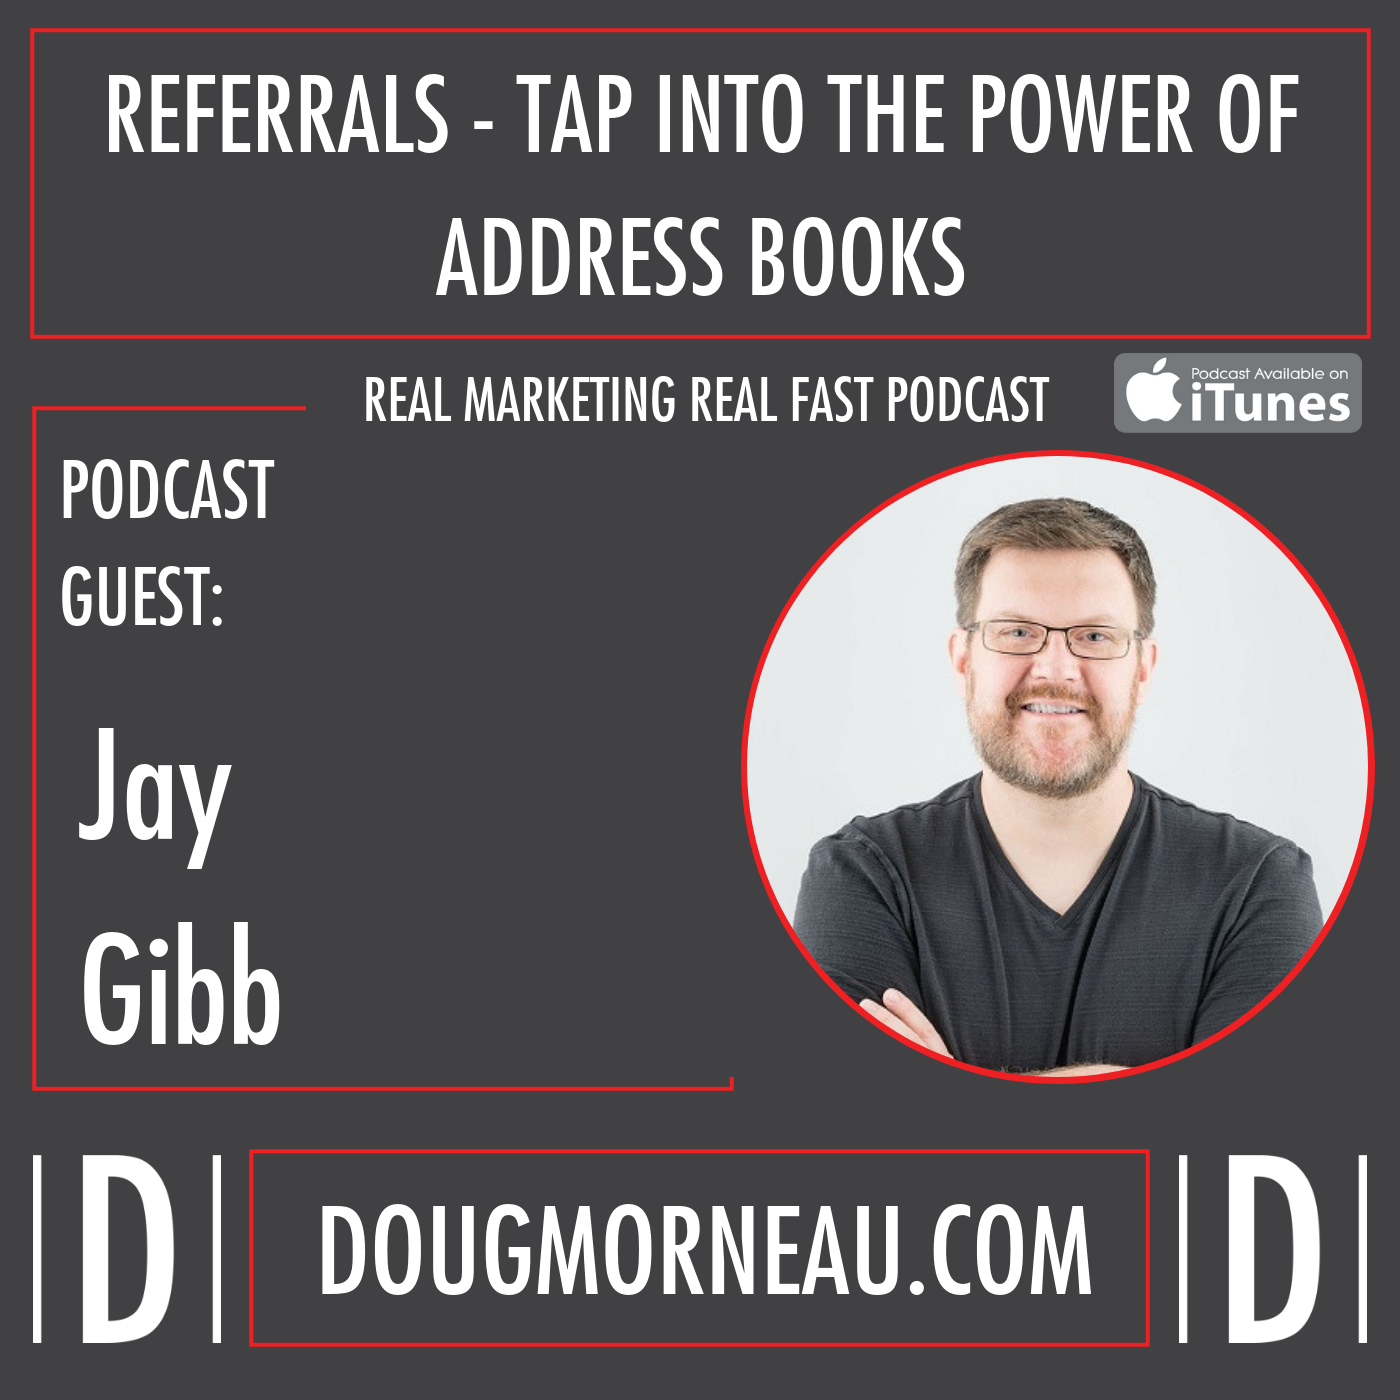 REFERRALS-TAP INTO THE POWER OF ADDRESS BOOKS JAY GIBB, REAL MARKETING REAL FAST PODCAST - DOUG MORNEAU